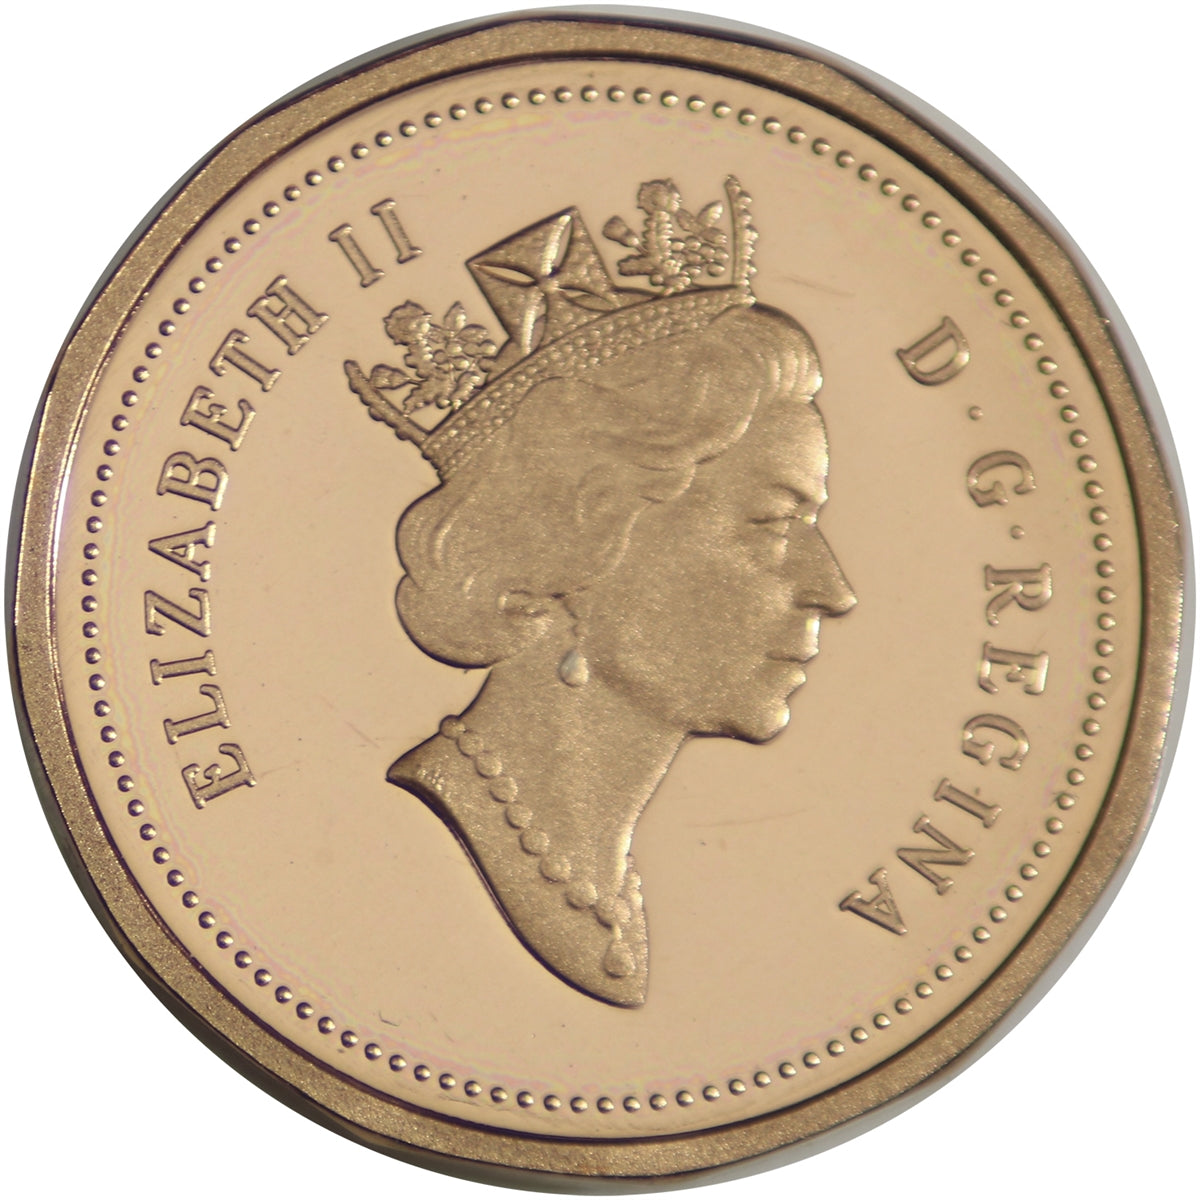 1991 Canada 1-cent Proof